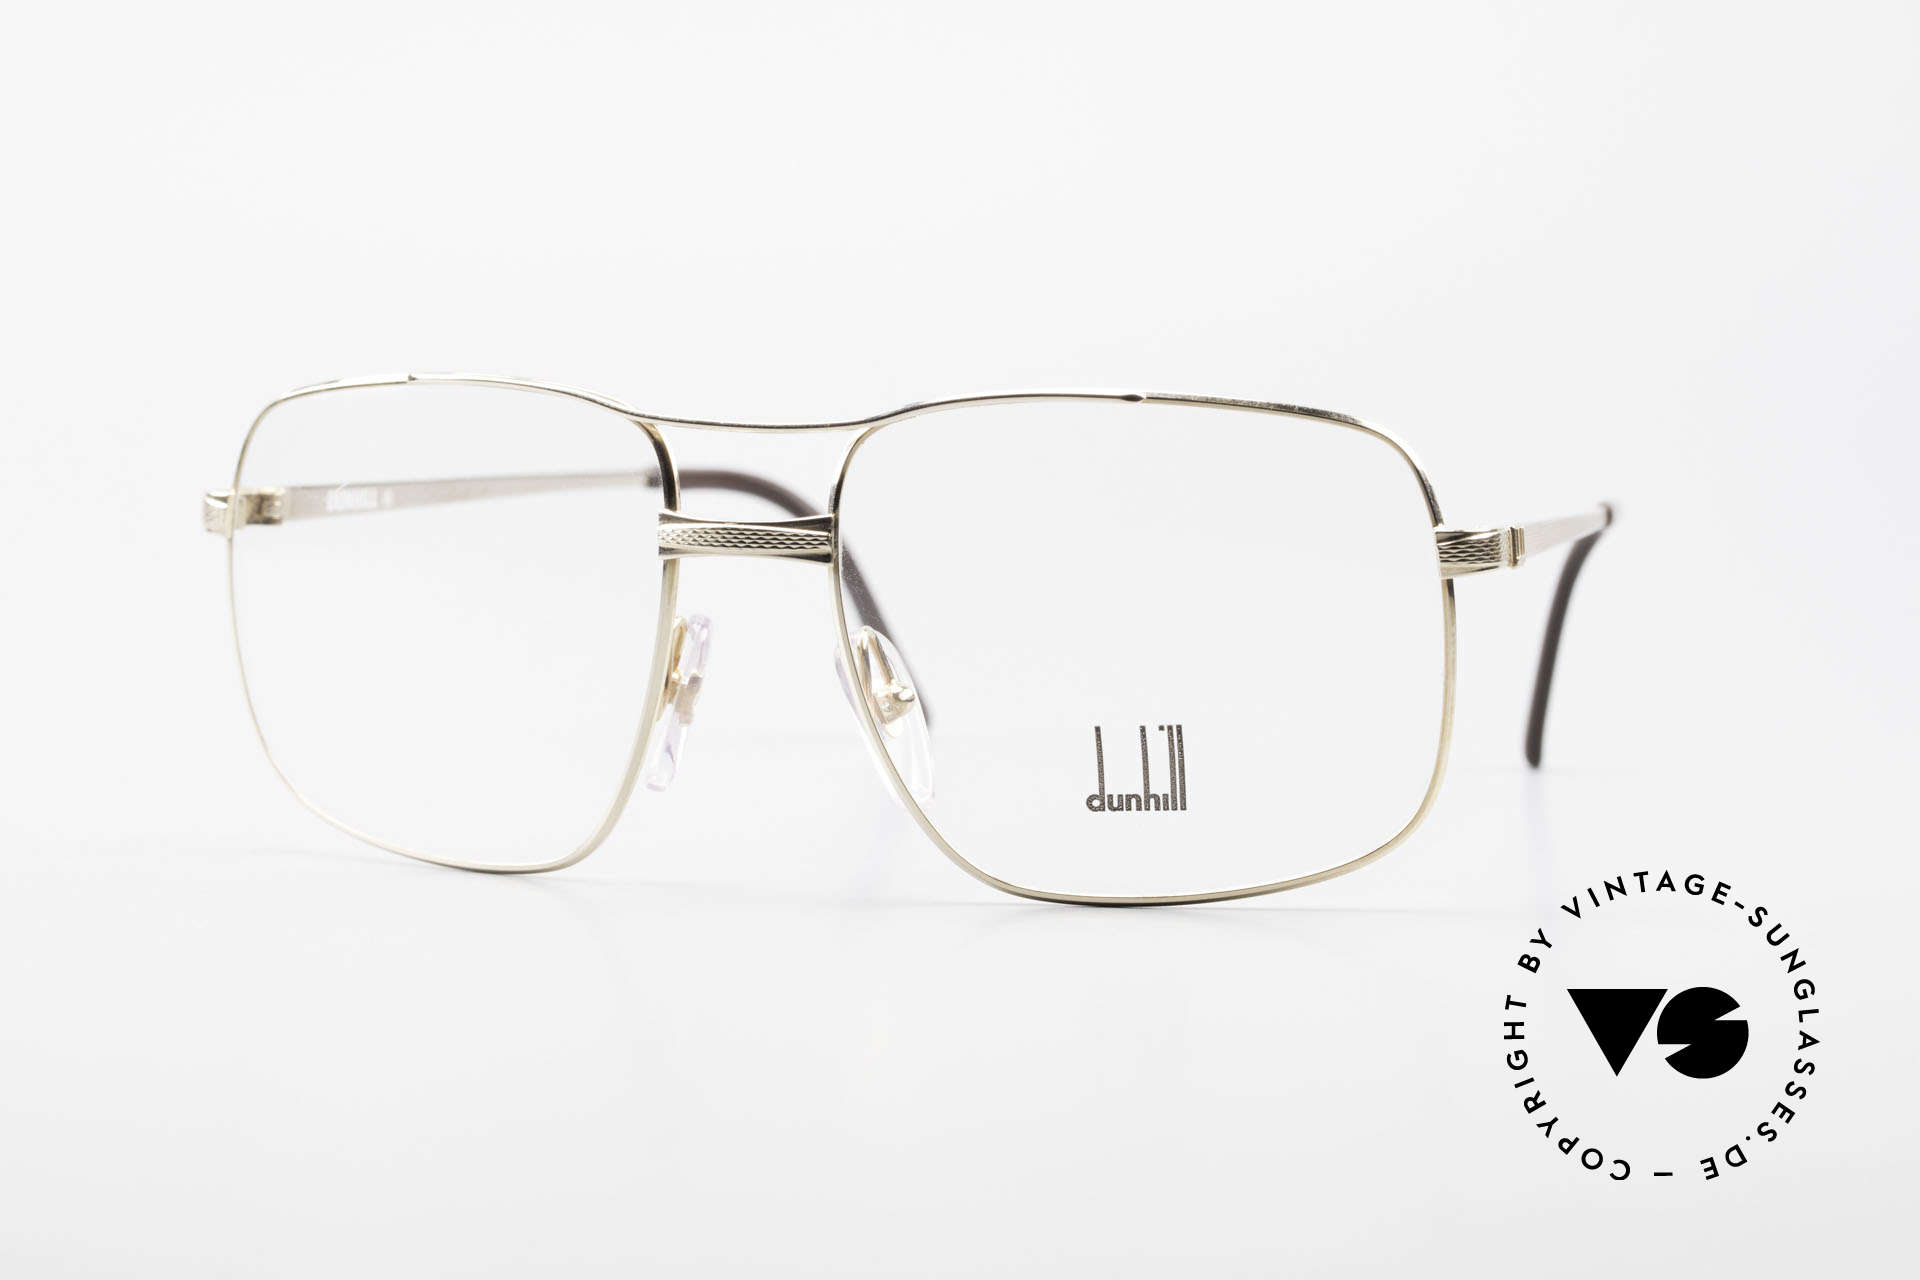 Dunhill 6048 Gold Plated 80's Eyeglasses, vintage Alfred Dunhill luxury eyeglasses from 1987, Made for Men